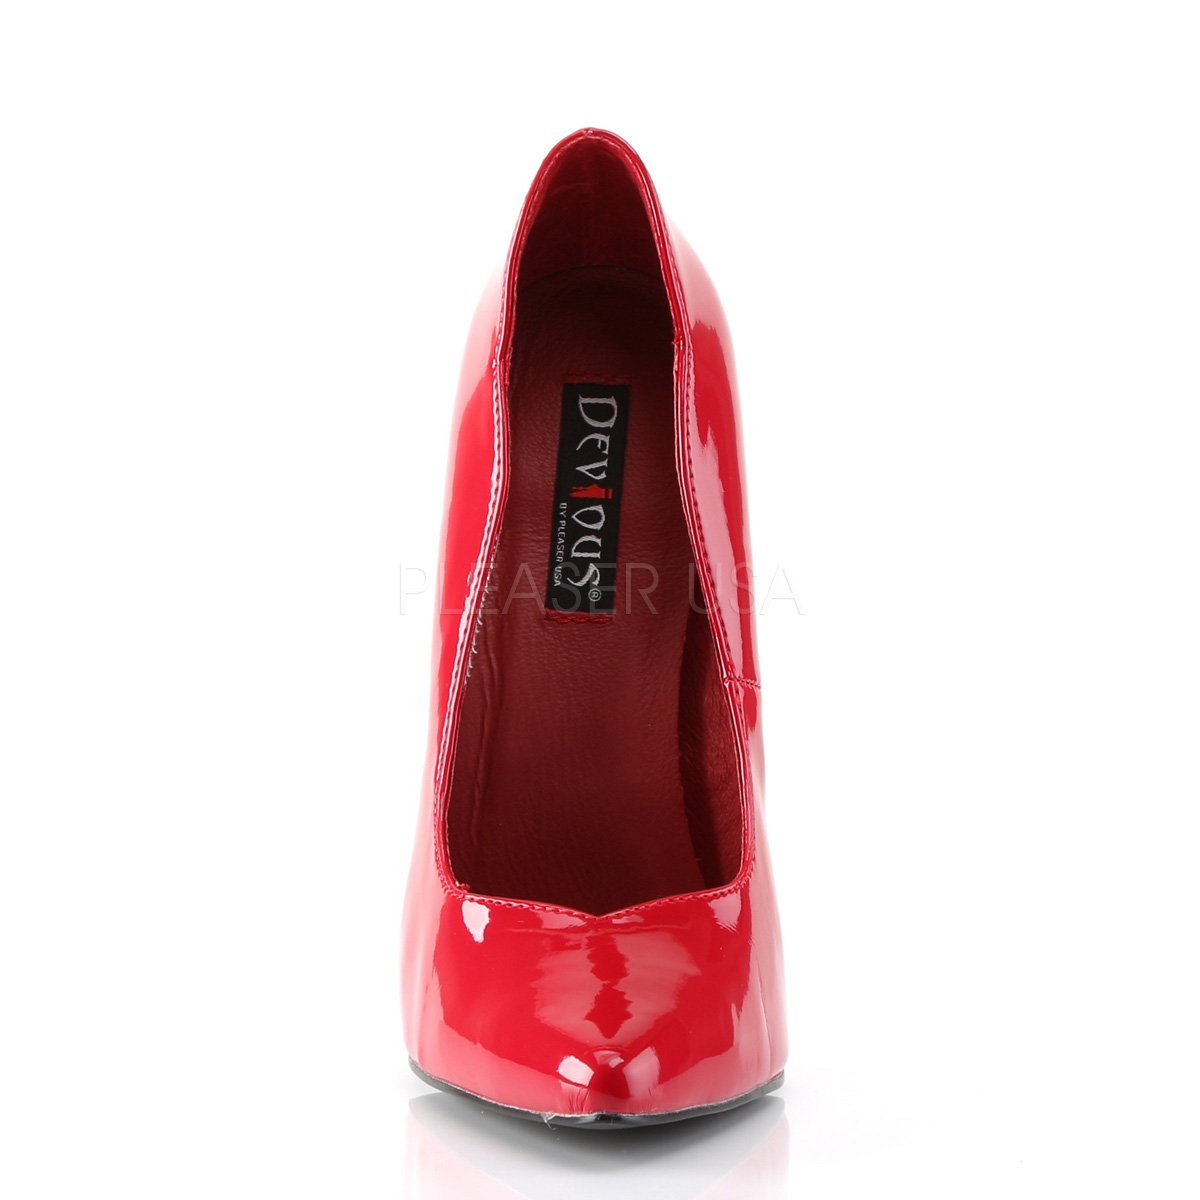 Fetish Shoes with 6-inch Stiletto Heel in Red or Black DAGGER-12